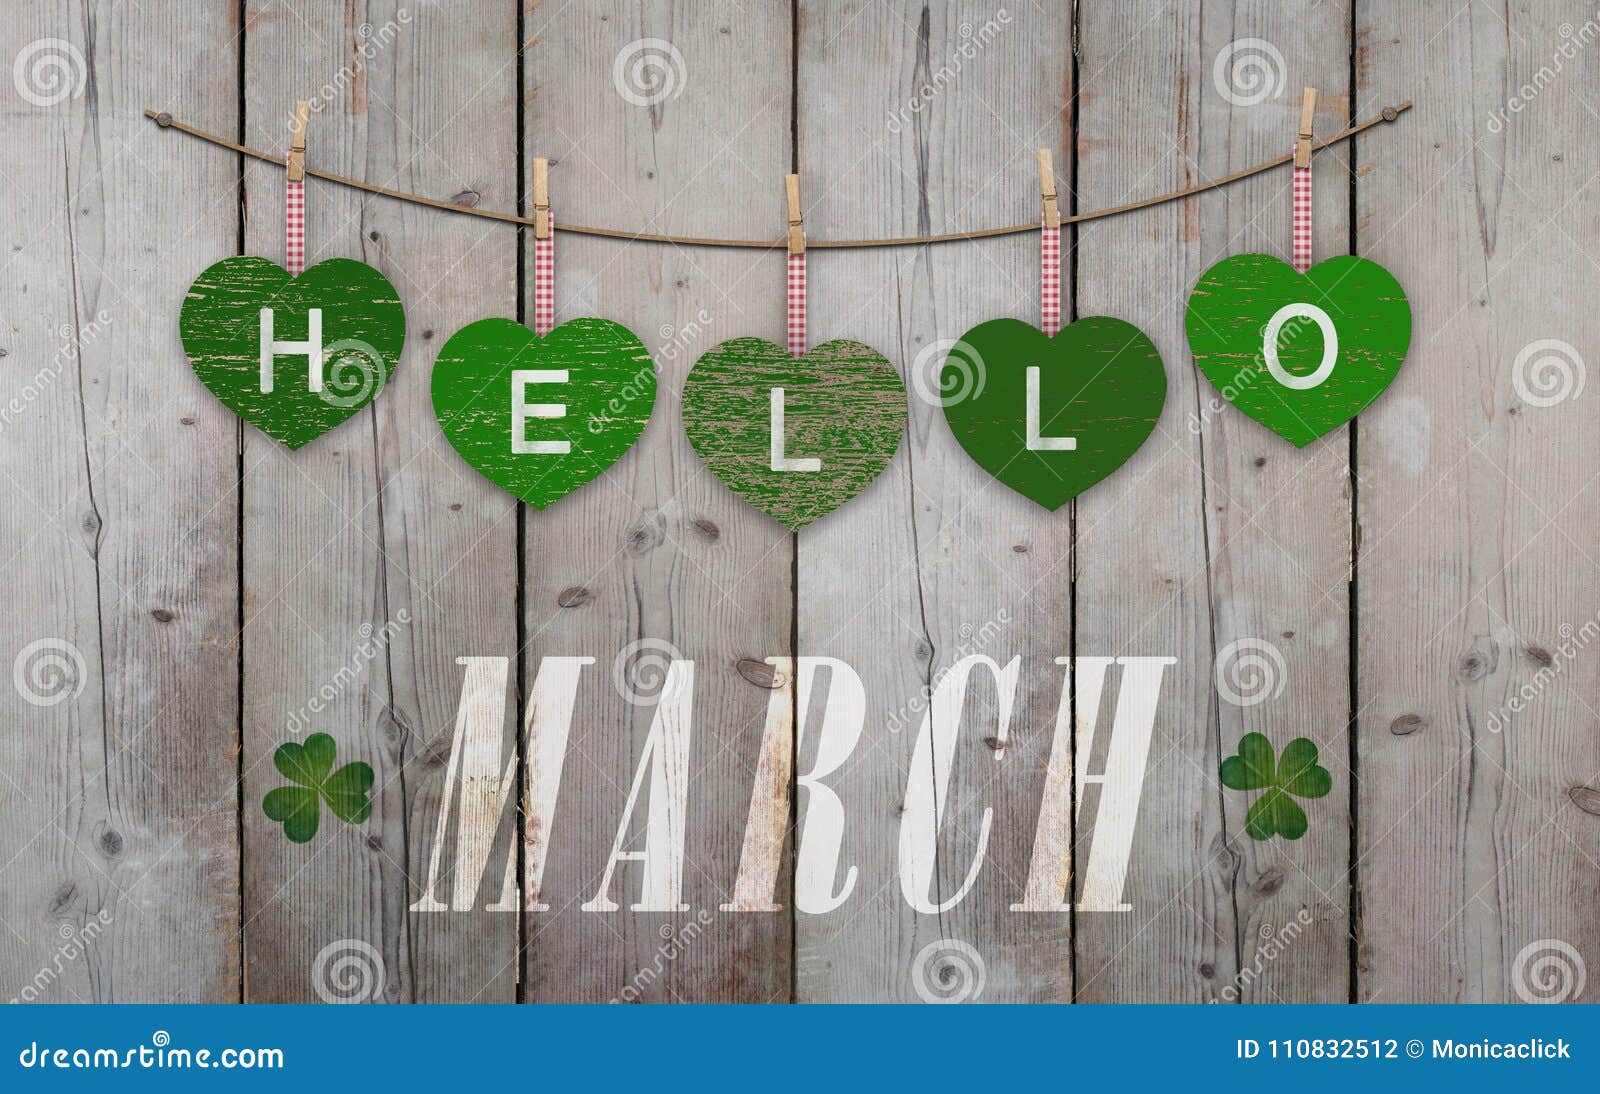 Hello March written on hanging green hearts and weathered wooden background